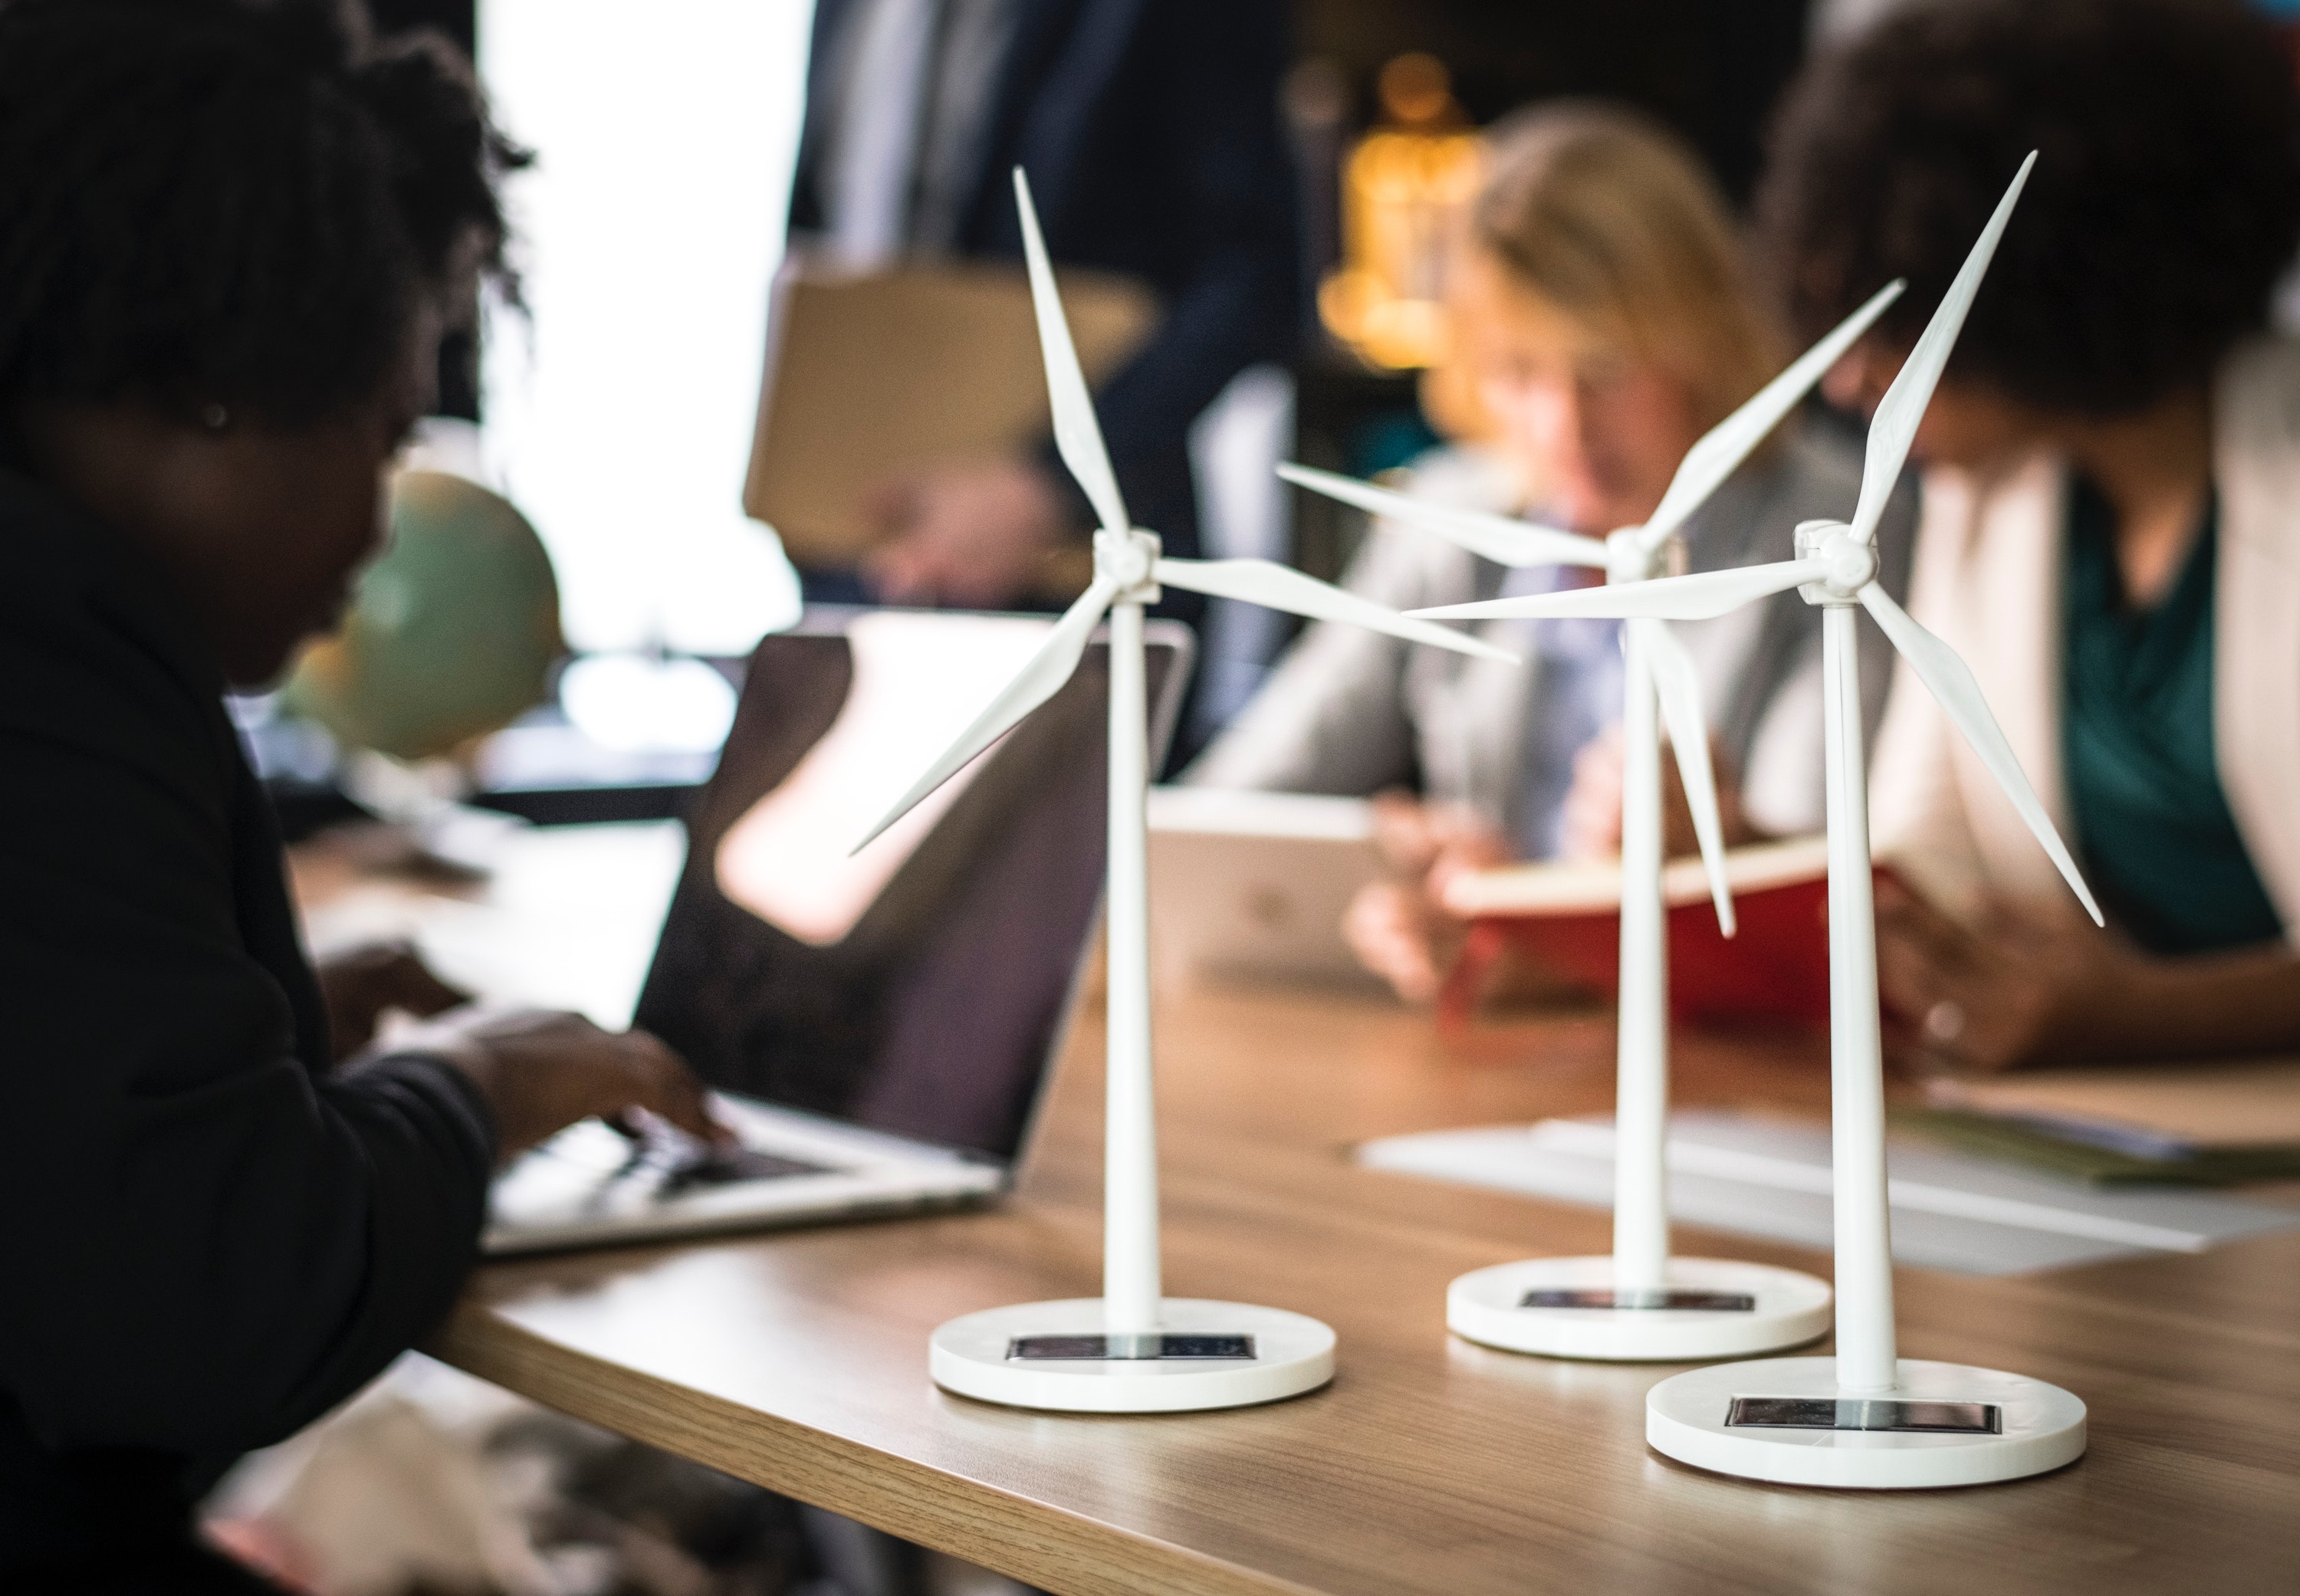 A few people work around a table with small replicas of energy producing windmills on the table.